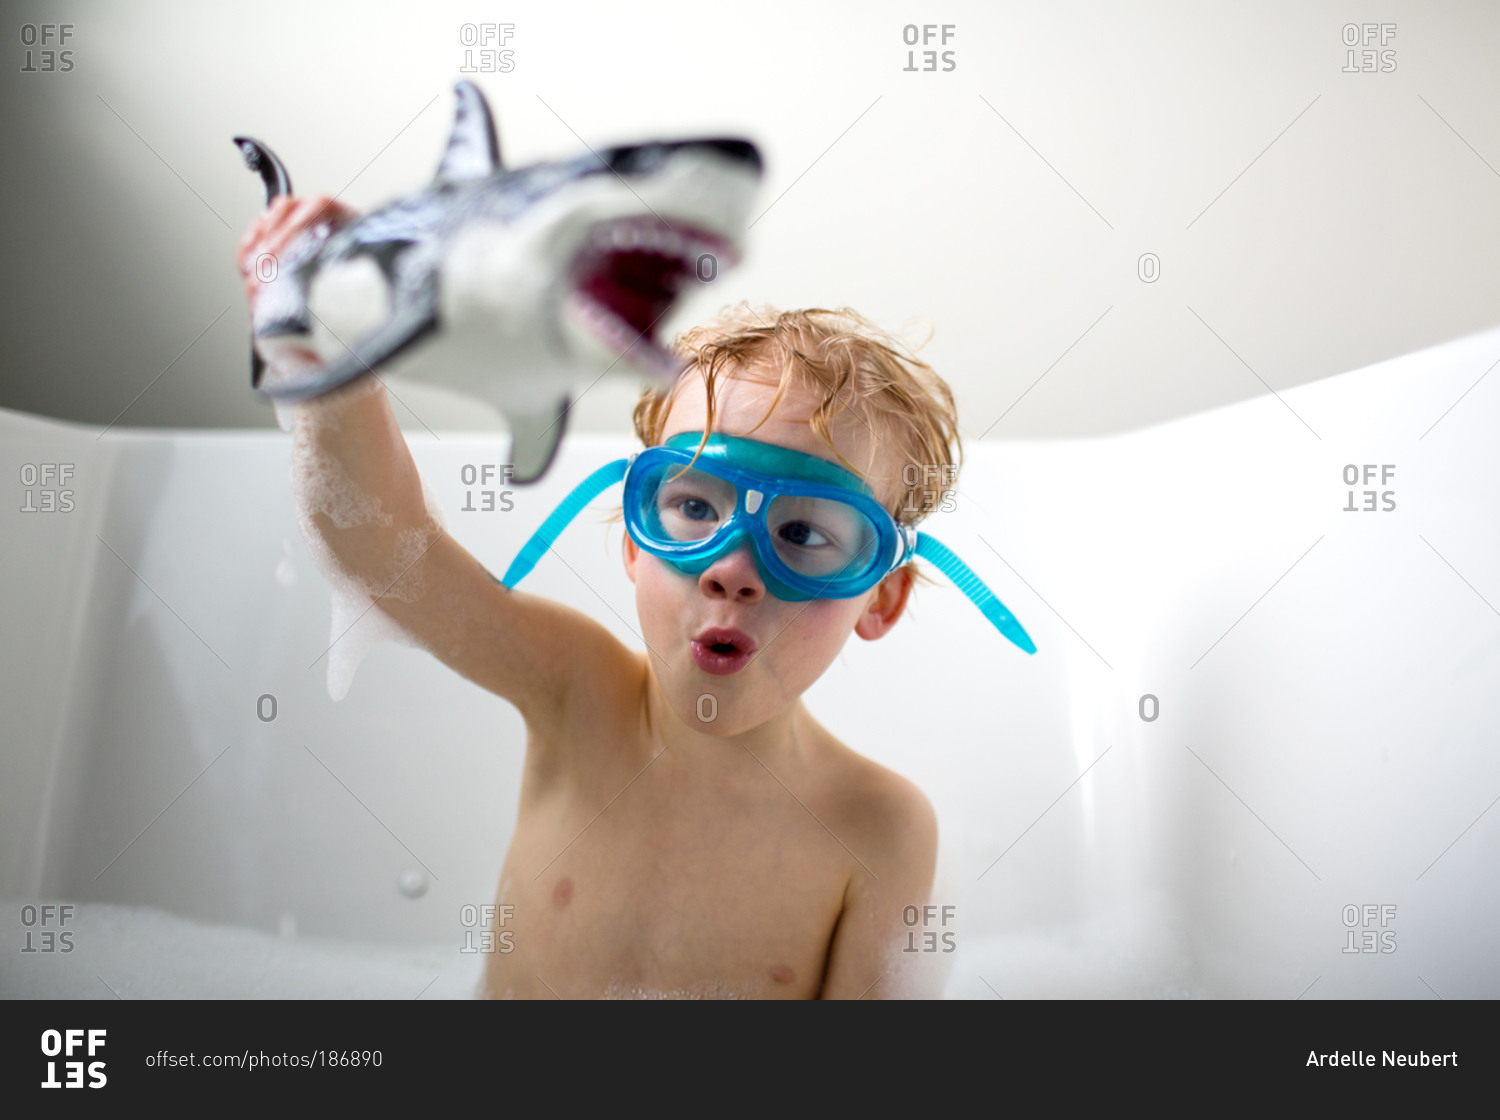 Swim Goggles Playing With A Toy Shark, Shark In Bathtub